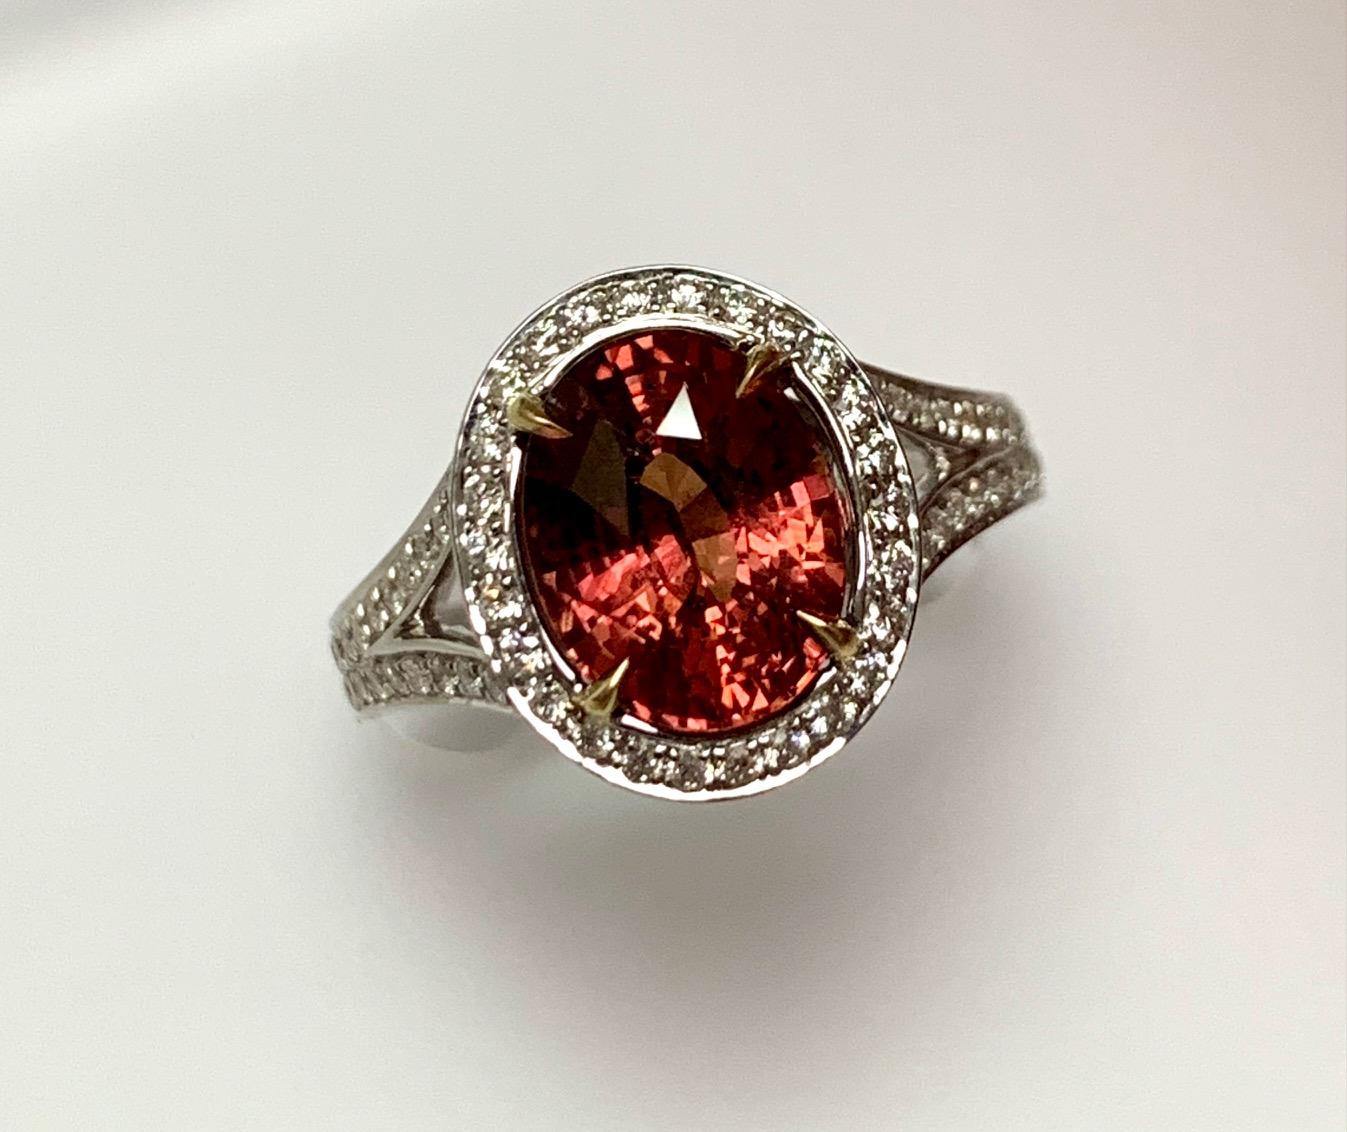 4.16 Carat Natural No heatoval shape  orange sapphire set in 18kw ting with 0.49 carat pave set diamonds arround and ha;f way on the split shank .